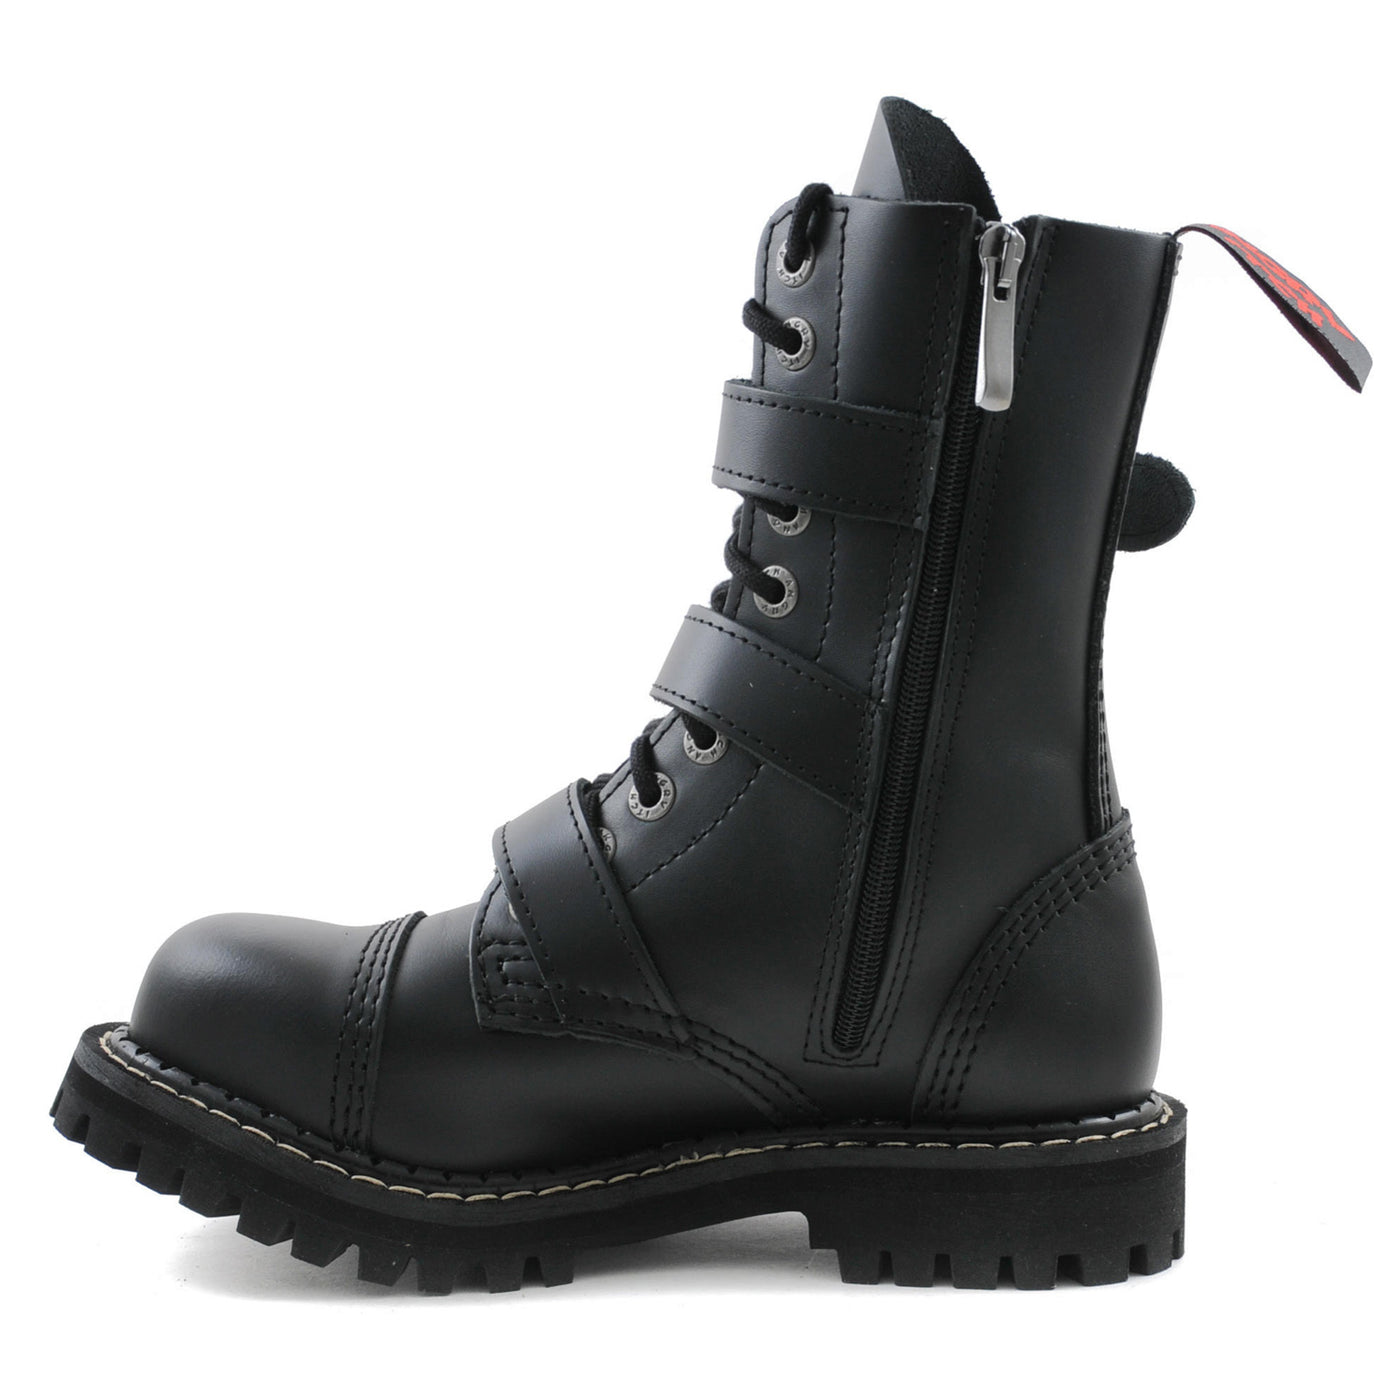 Angry Itch 3 Buckle 10 Hole Boots with Steel Toe Cap Black Leather